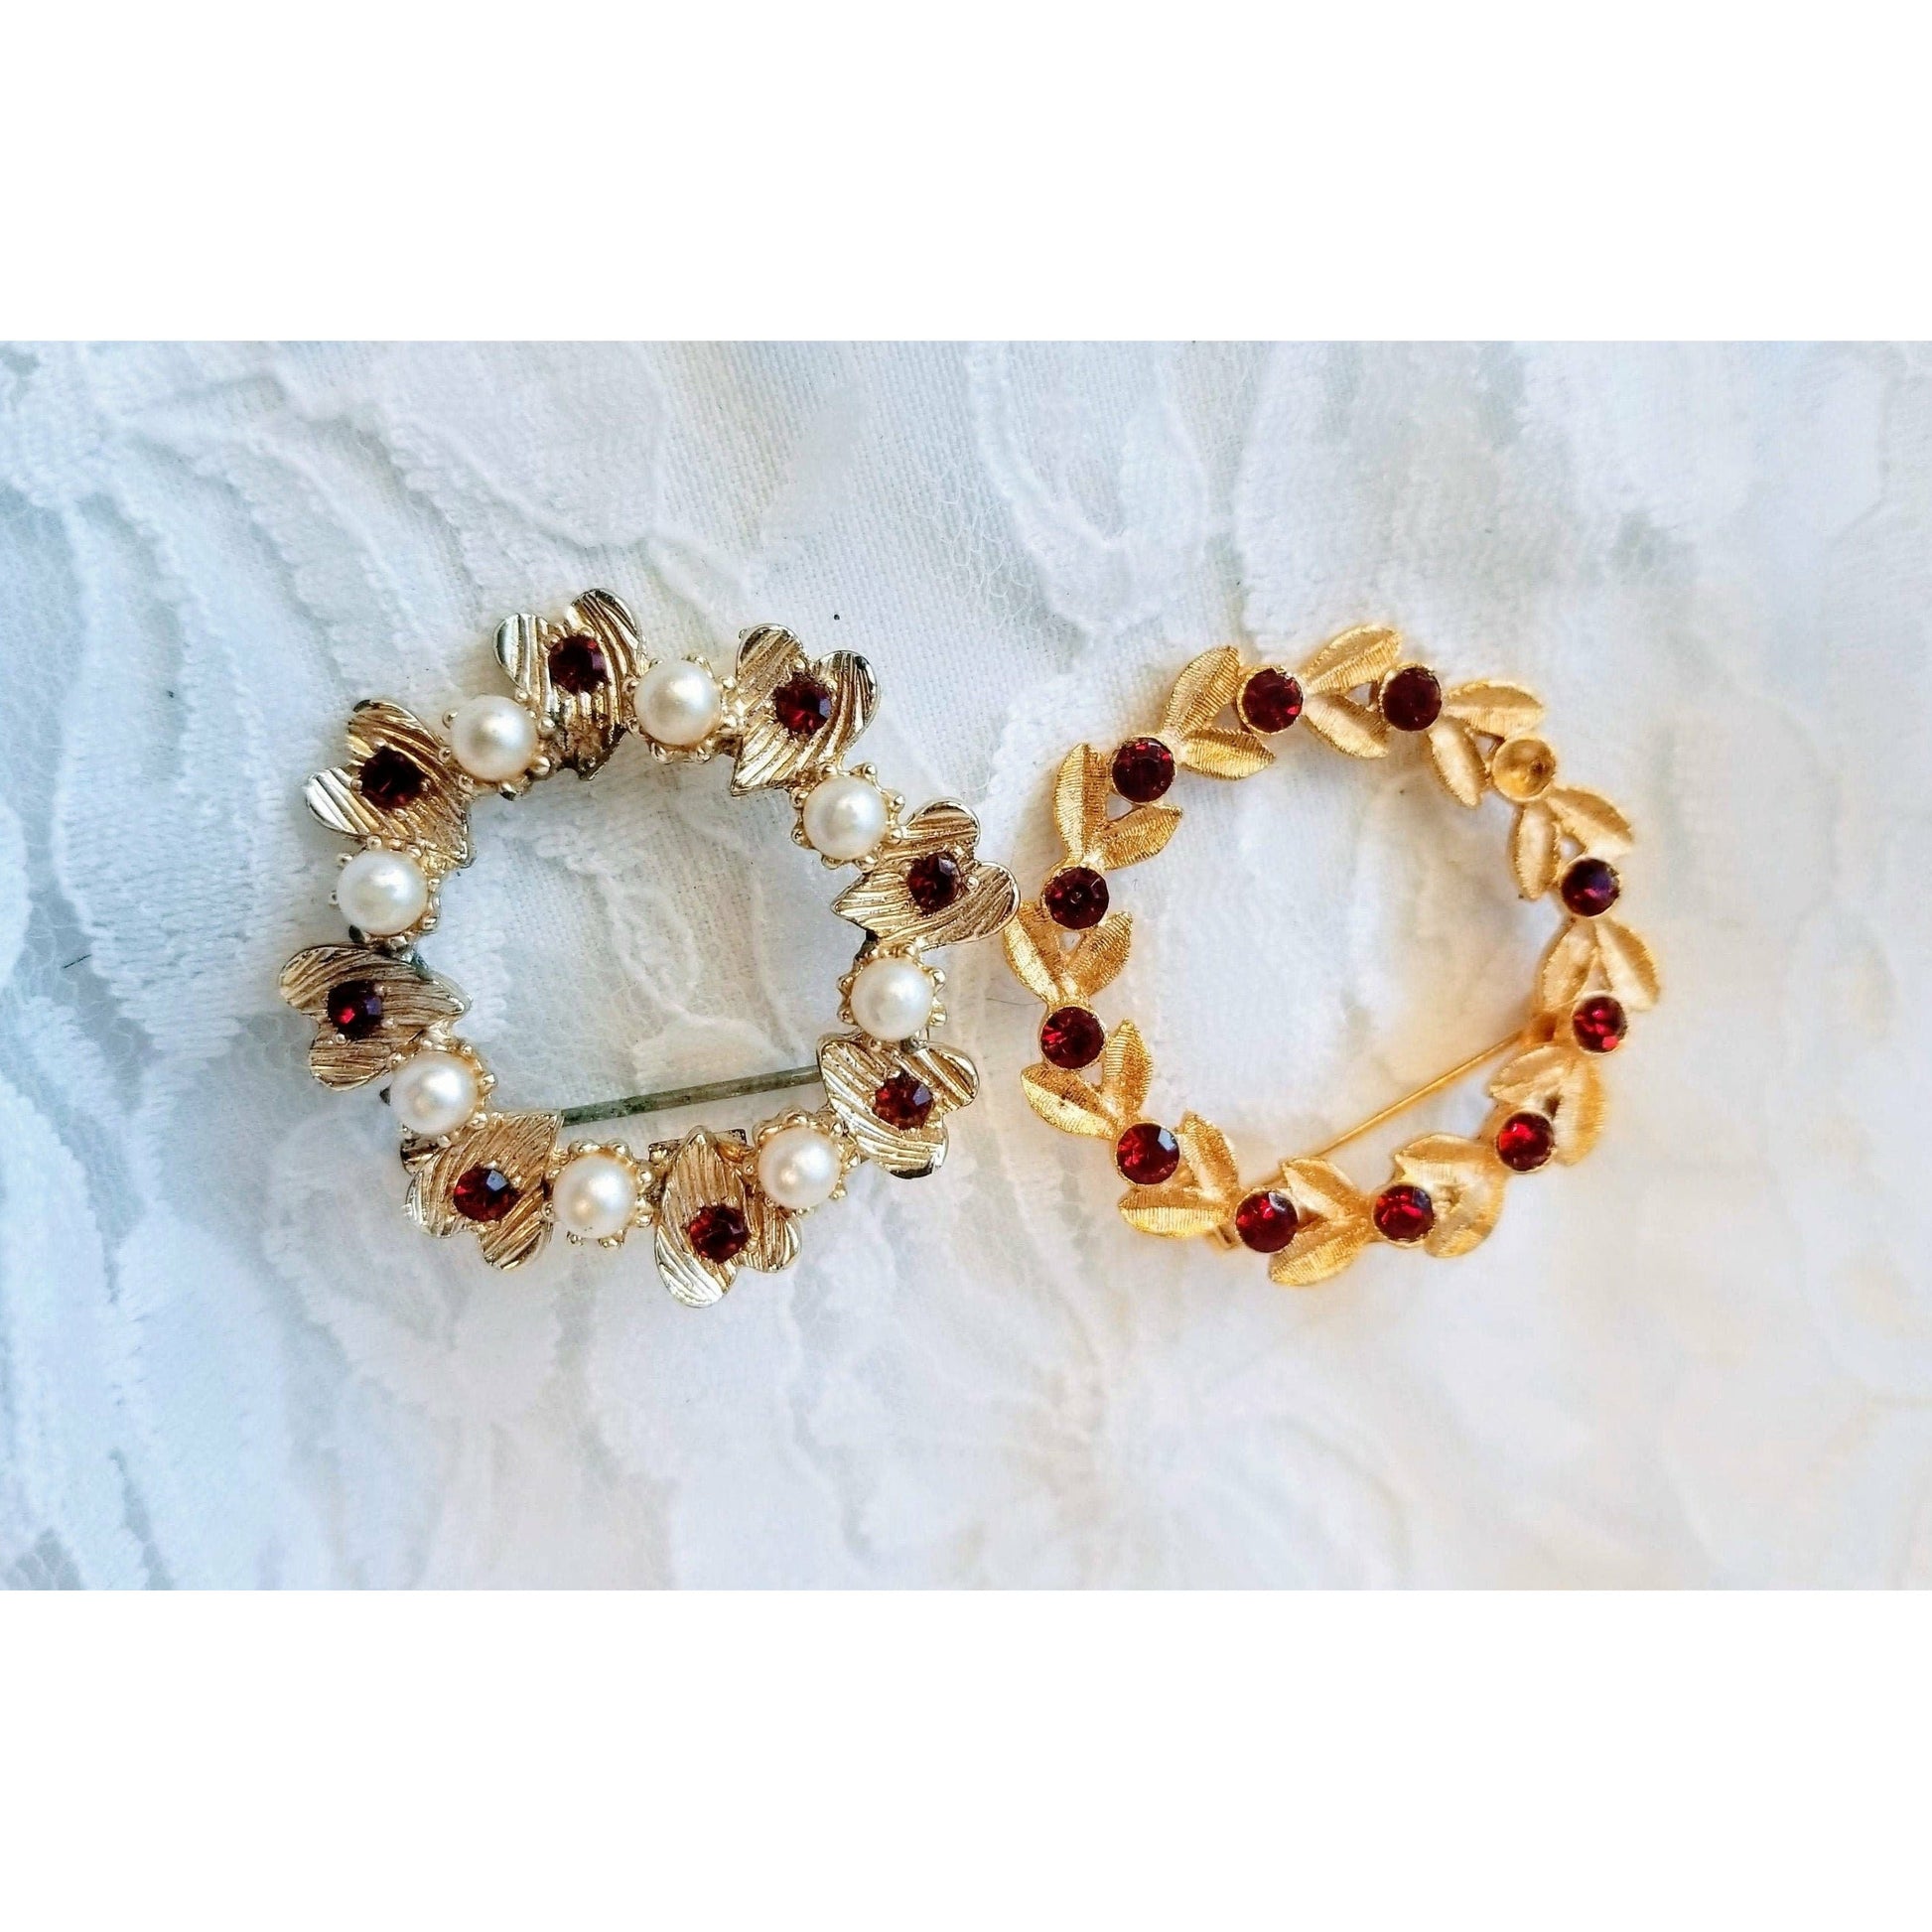 Set of 2 Red and Gold Tone Circle Brooches 1950s Red Crystal Rhinestone and Seed Pearl Pins Brooches Brooch